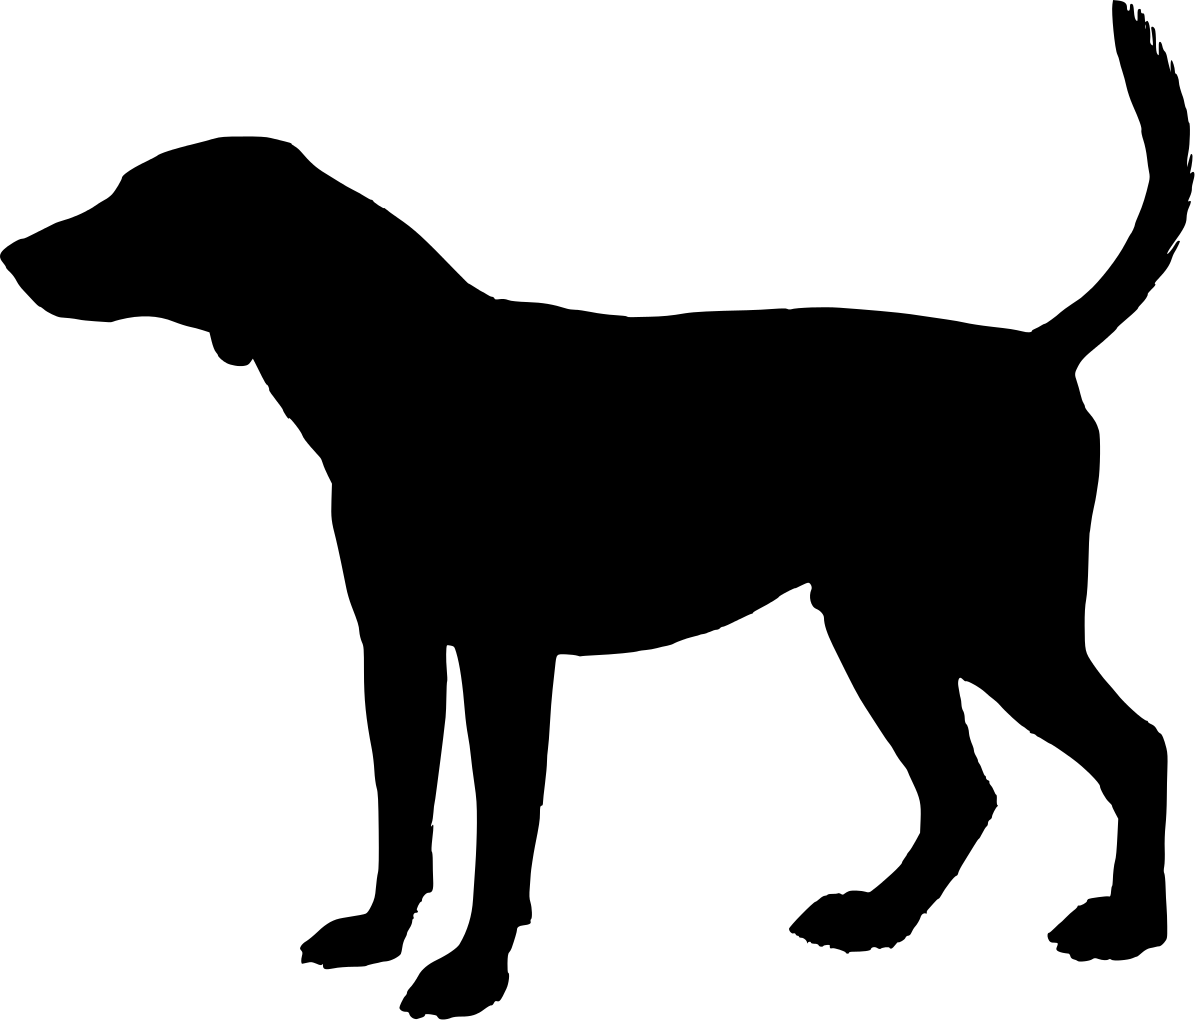 Dog Head Silhouette Png Images  Pictures - Becuo